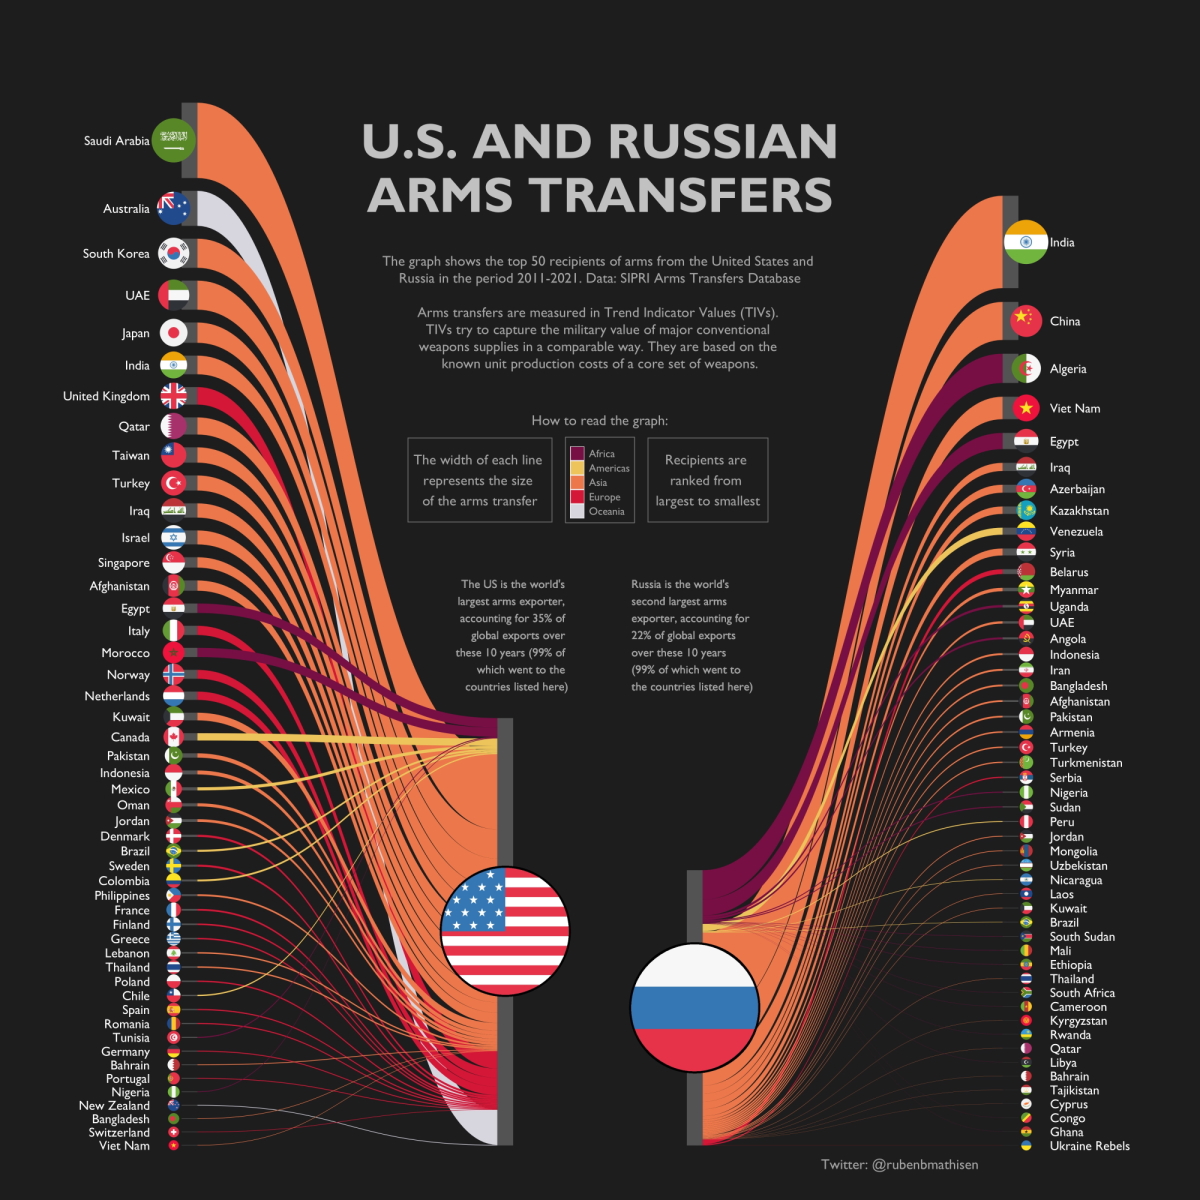 This graphic highlights trade partners for U.S. and Russia arms transfers